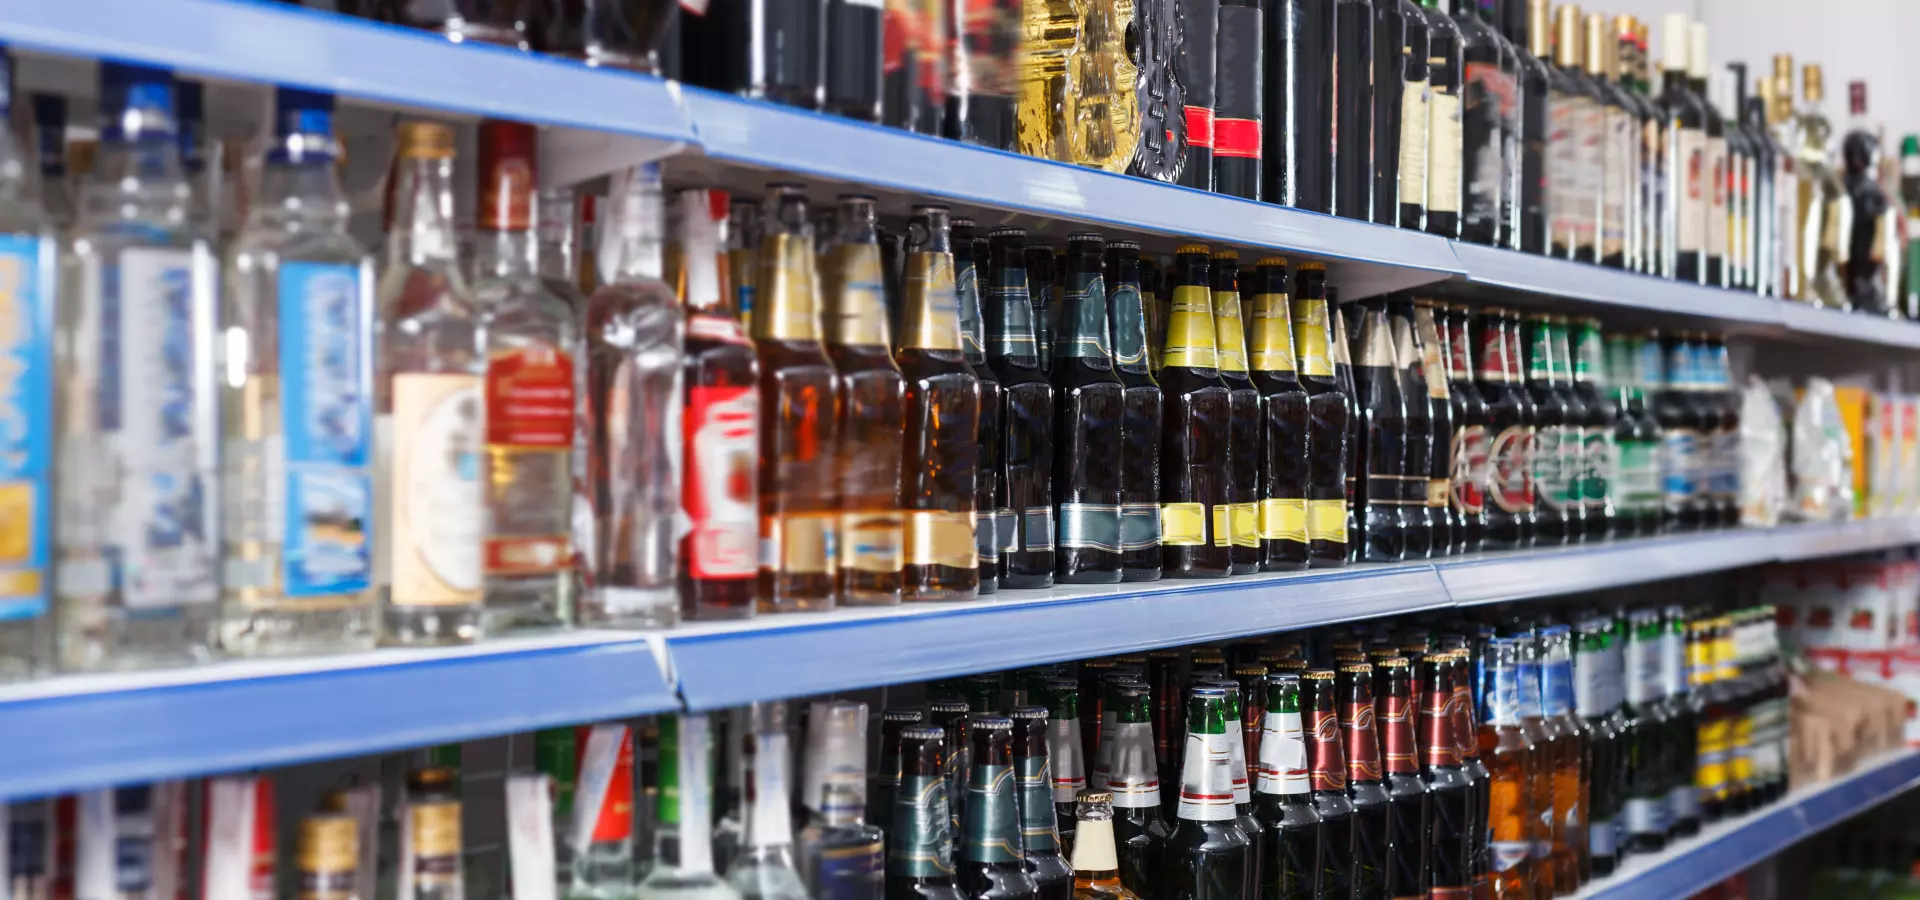 Alcohol aisle in a supermarket.